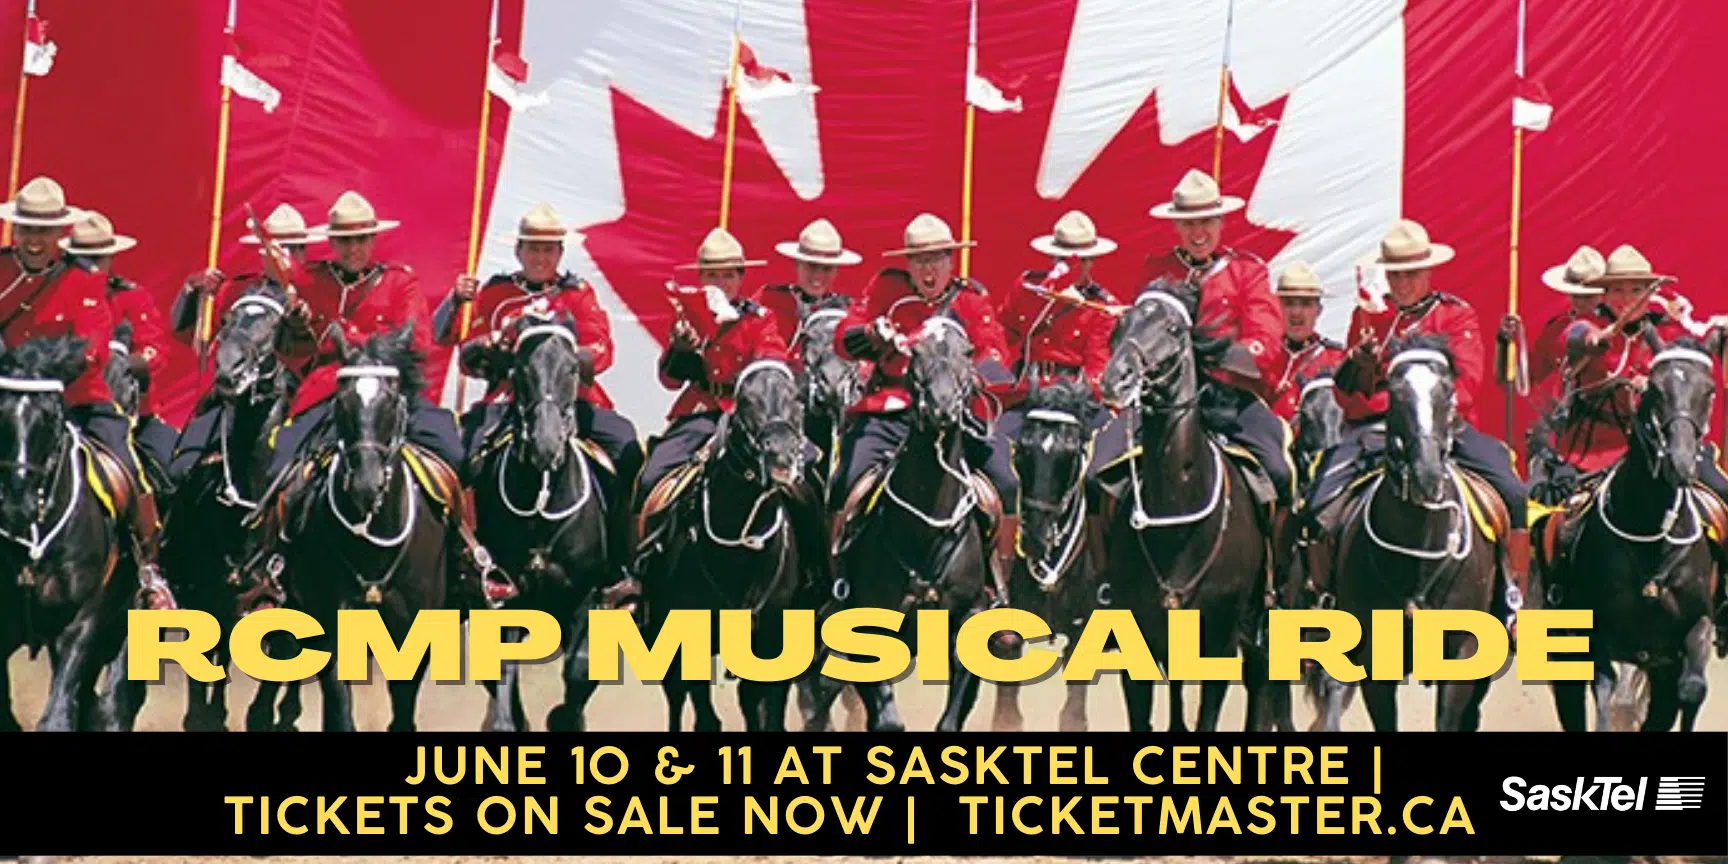 Royal Canadian Mounted Police (RCMP) Musical Ride | 650 CKOM